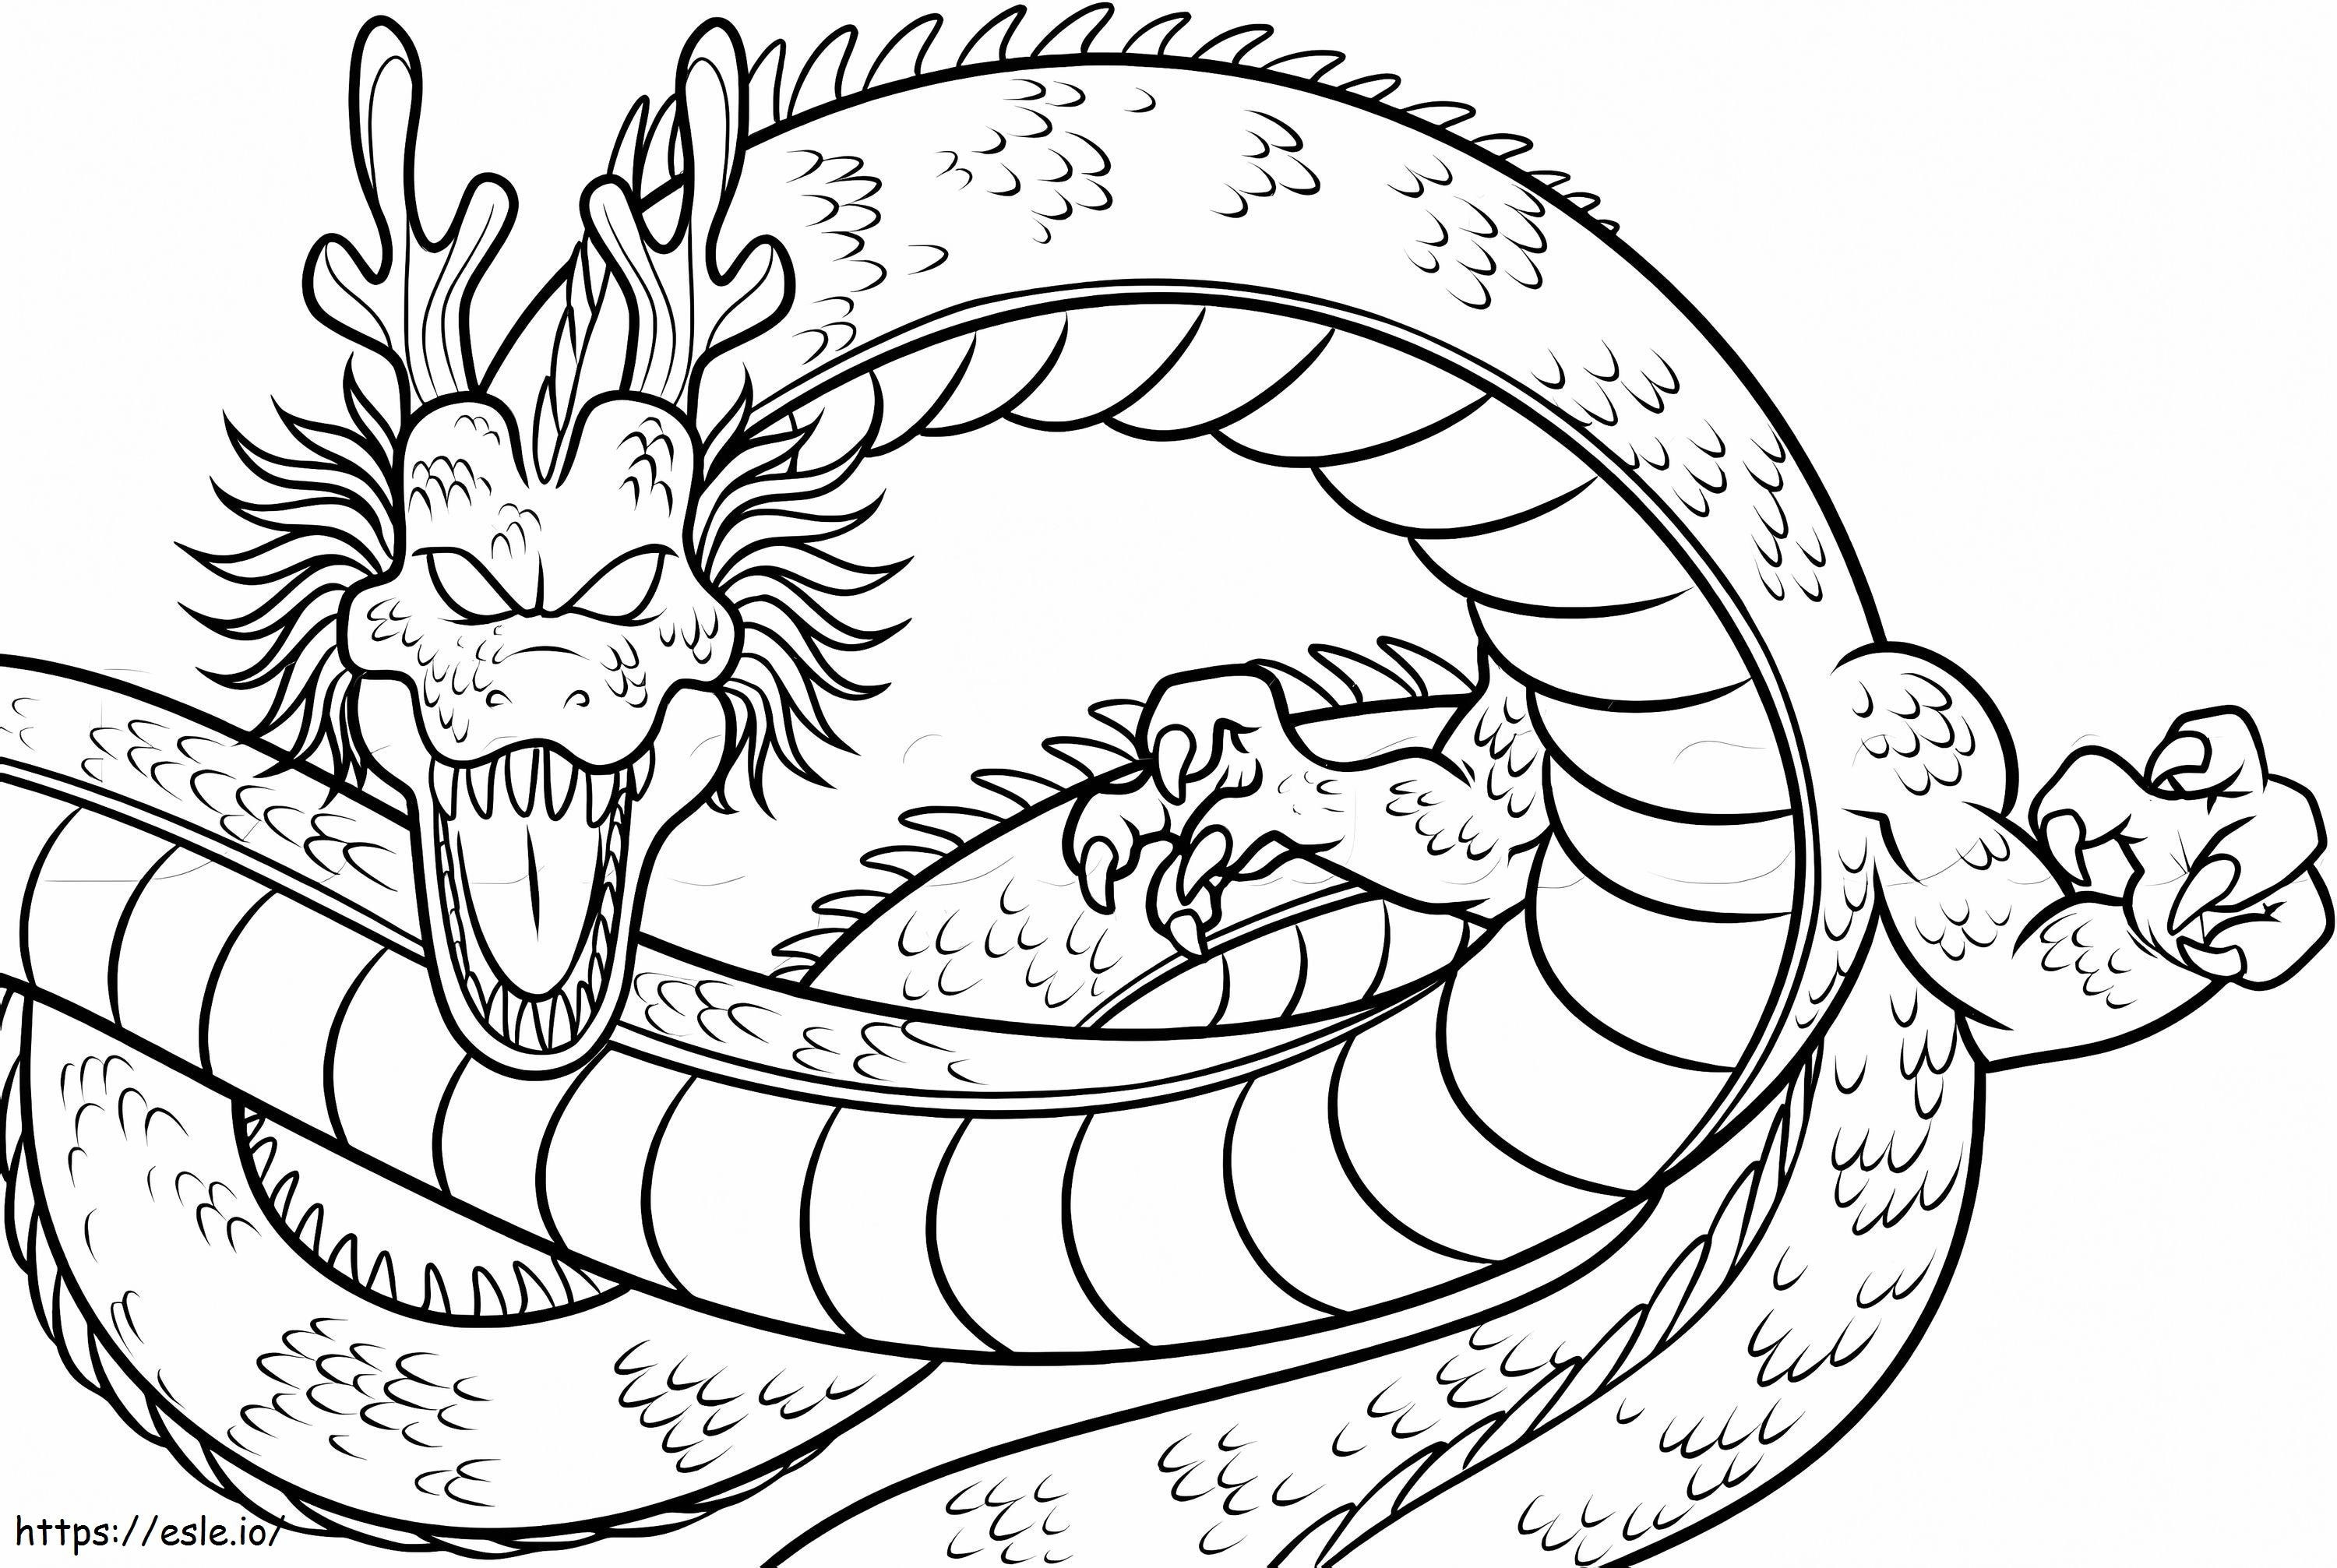 Shenron 4 coloring page